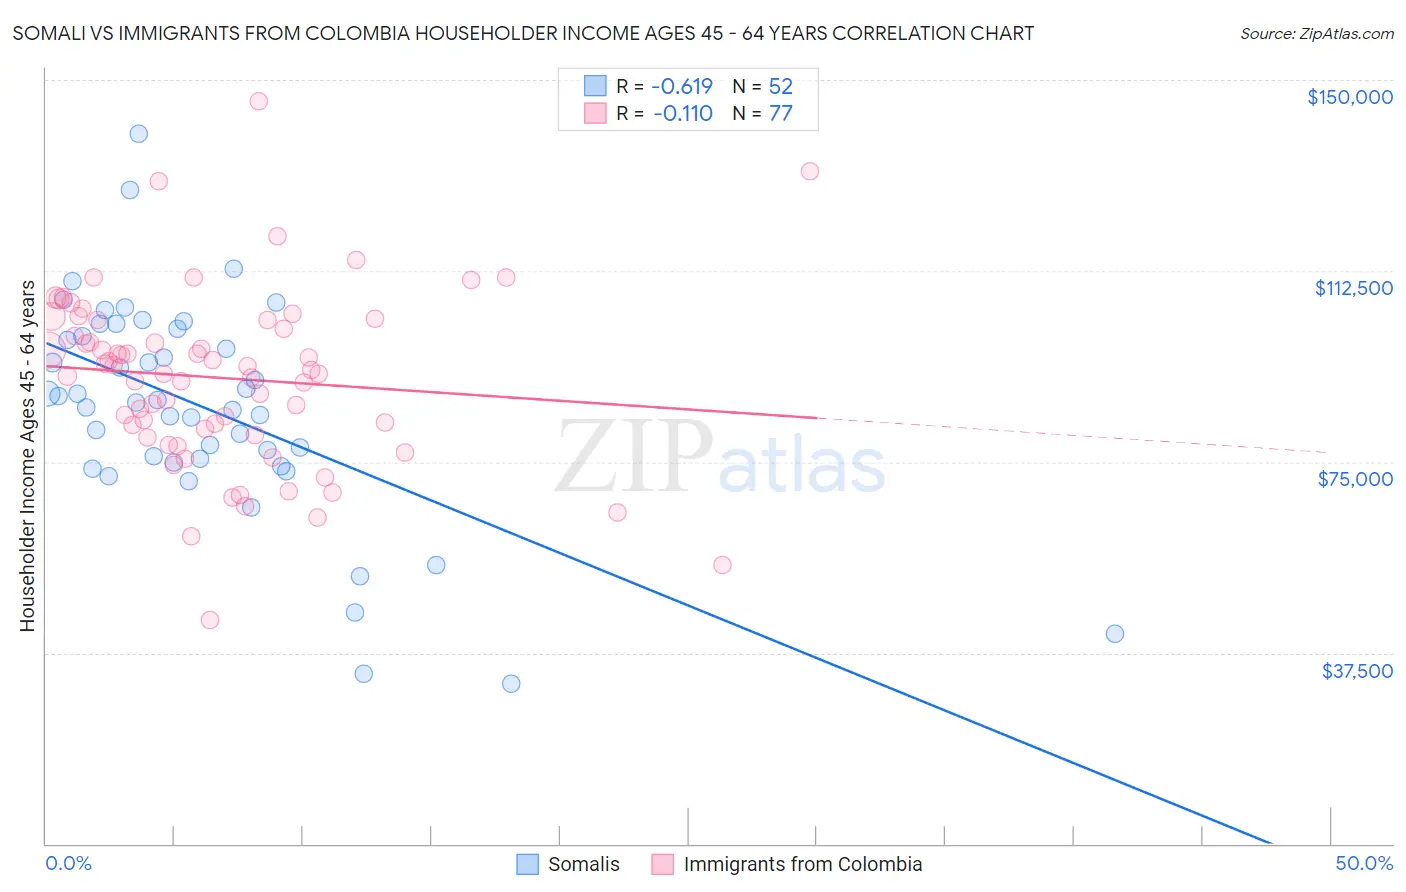 Somali vs Immigrants from Colombia Householder Income Ages 45 - 64 years